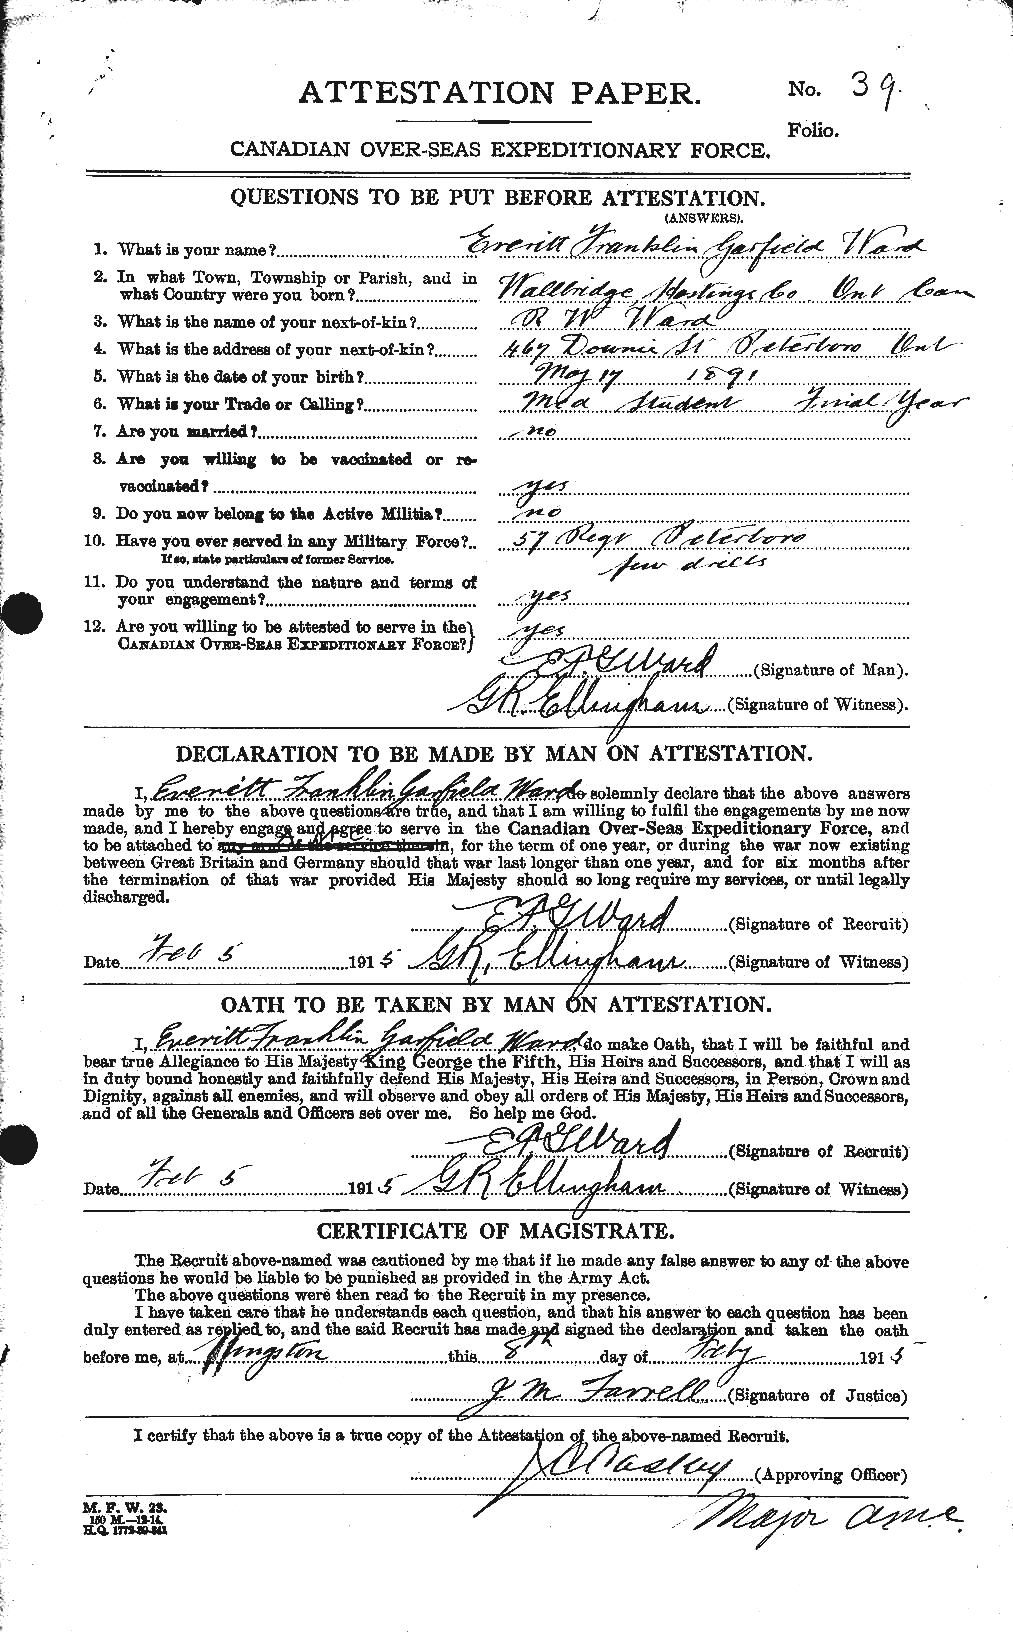 Personnel Records of the First World War - CEF 657677a